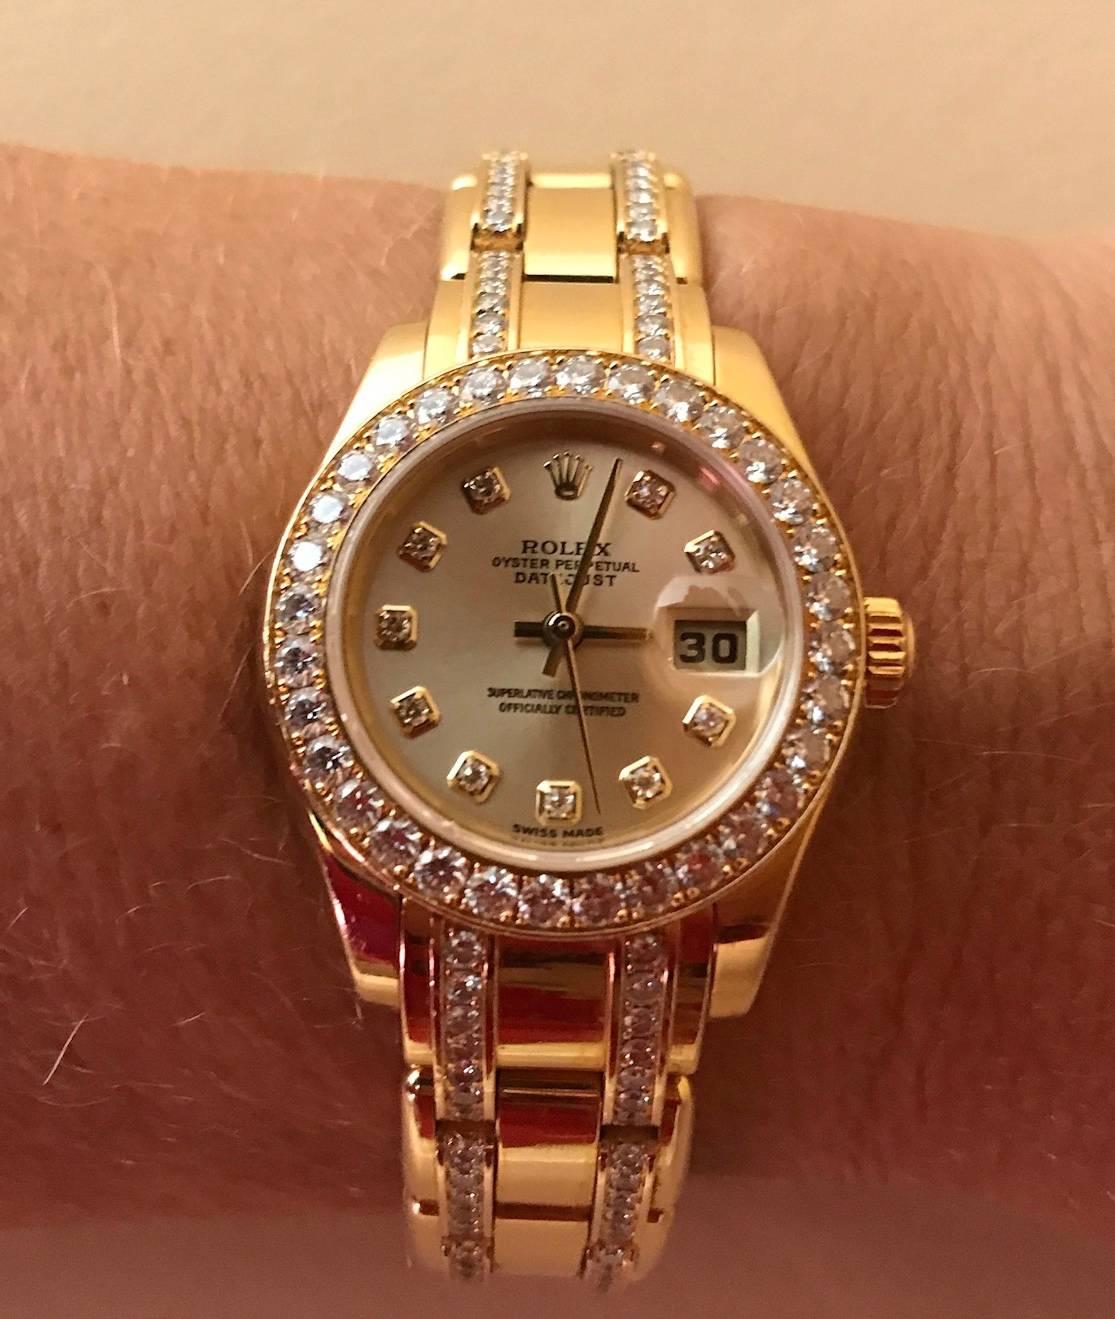 Lady's 18K yellow gold Rolex Oyster Perpetual Datejust Pearlmaster with champagne diamond dial, diamond bezel and diamond bracelet.
Style R8029882GB7494